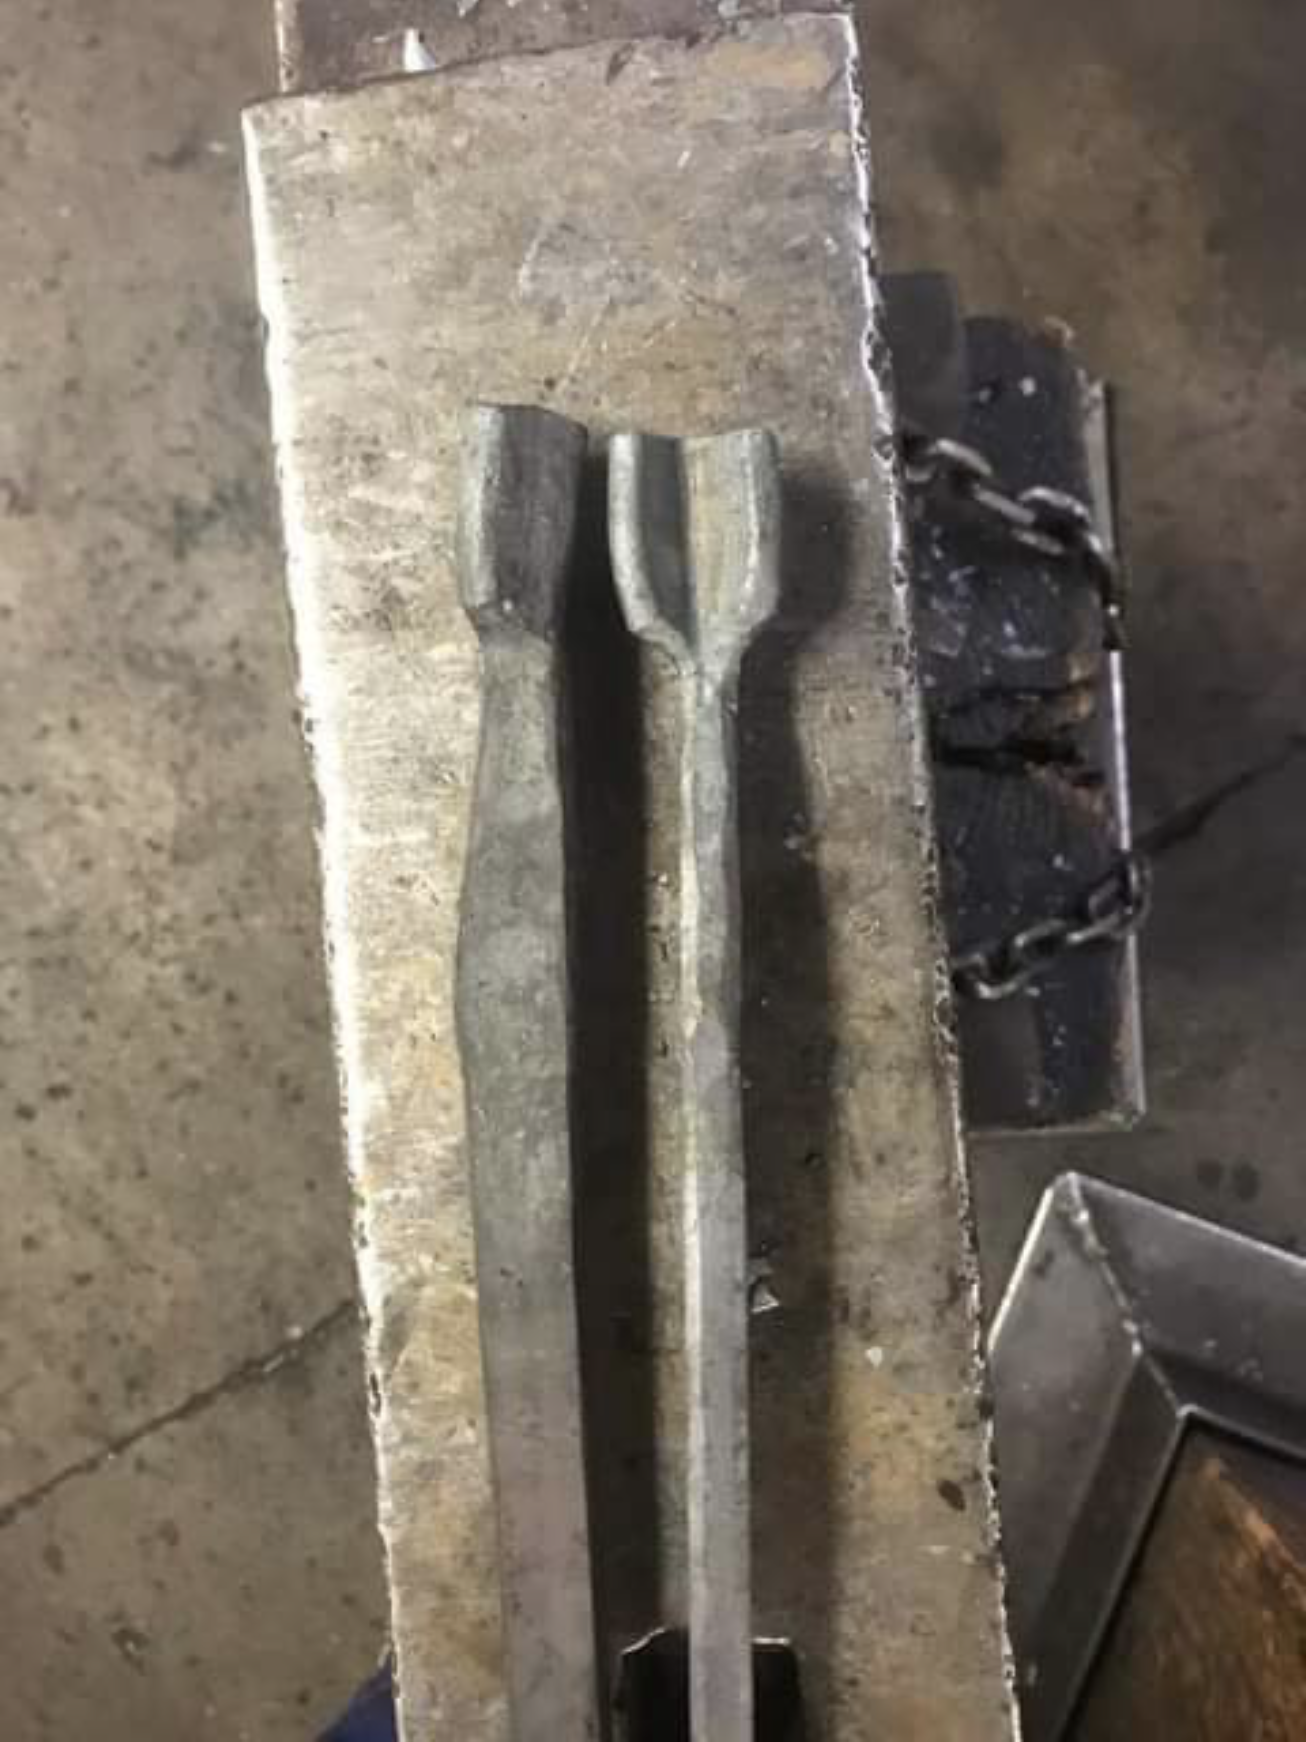 Two sides of a pair of tongs